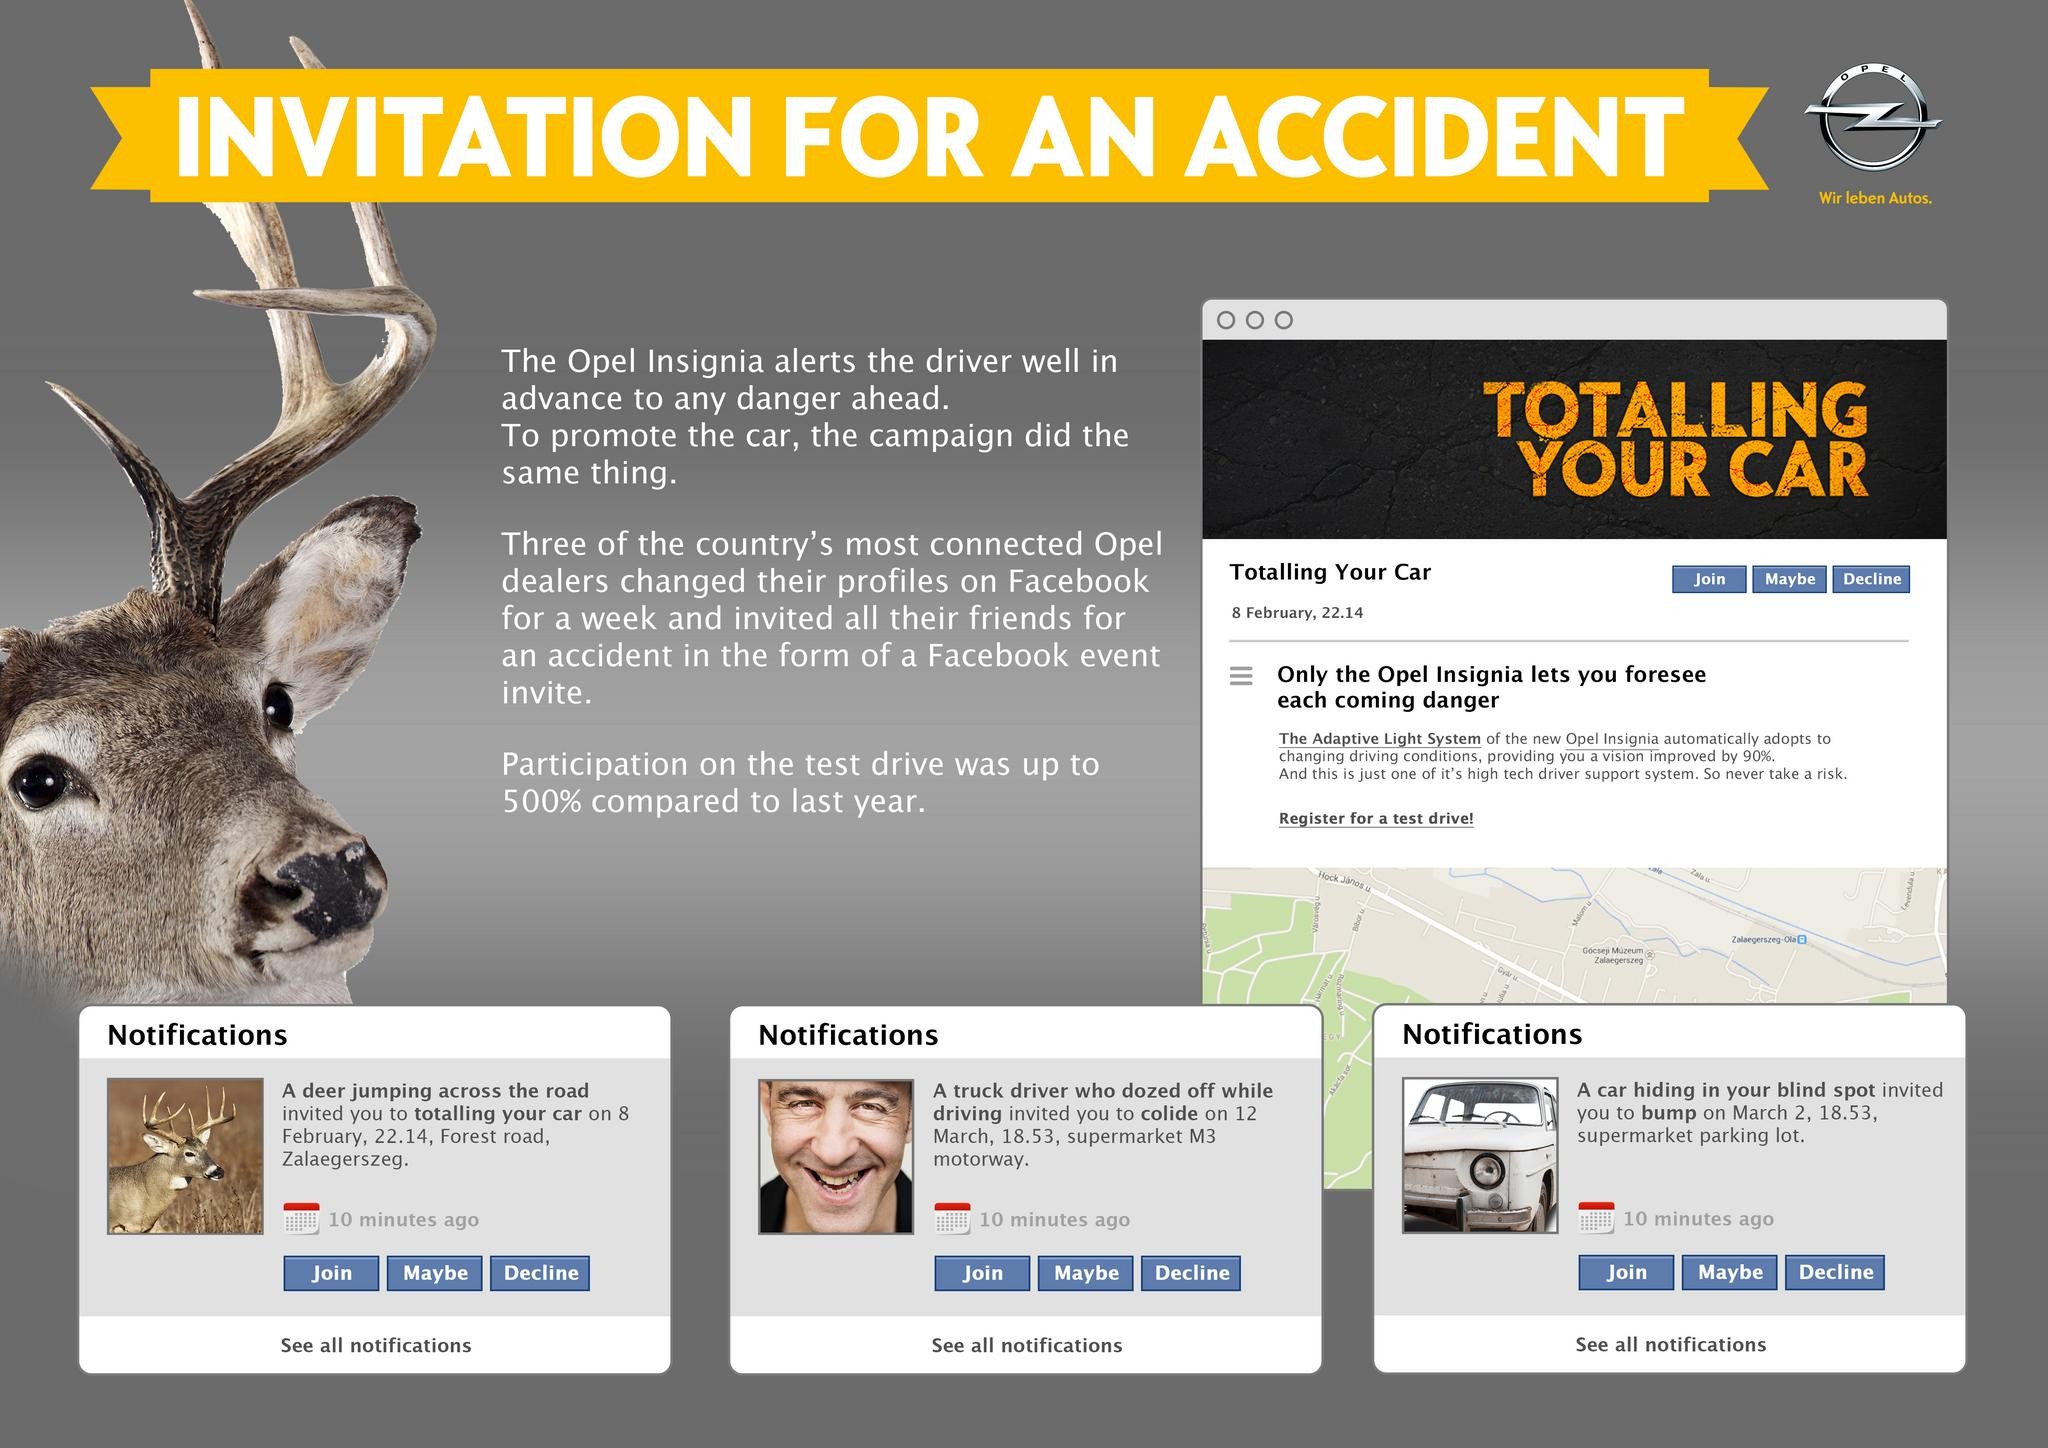 INVITATION FOR AN ACCIDENT